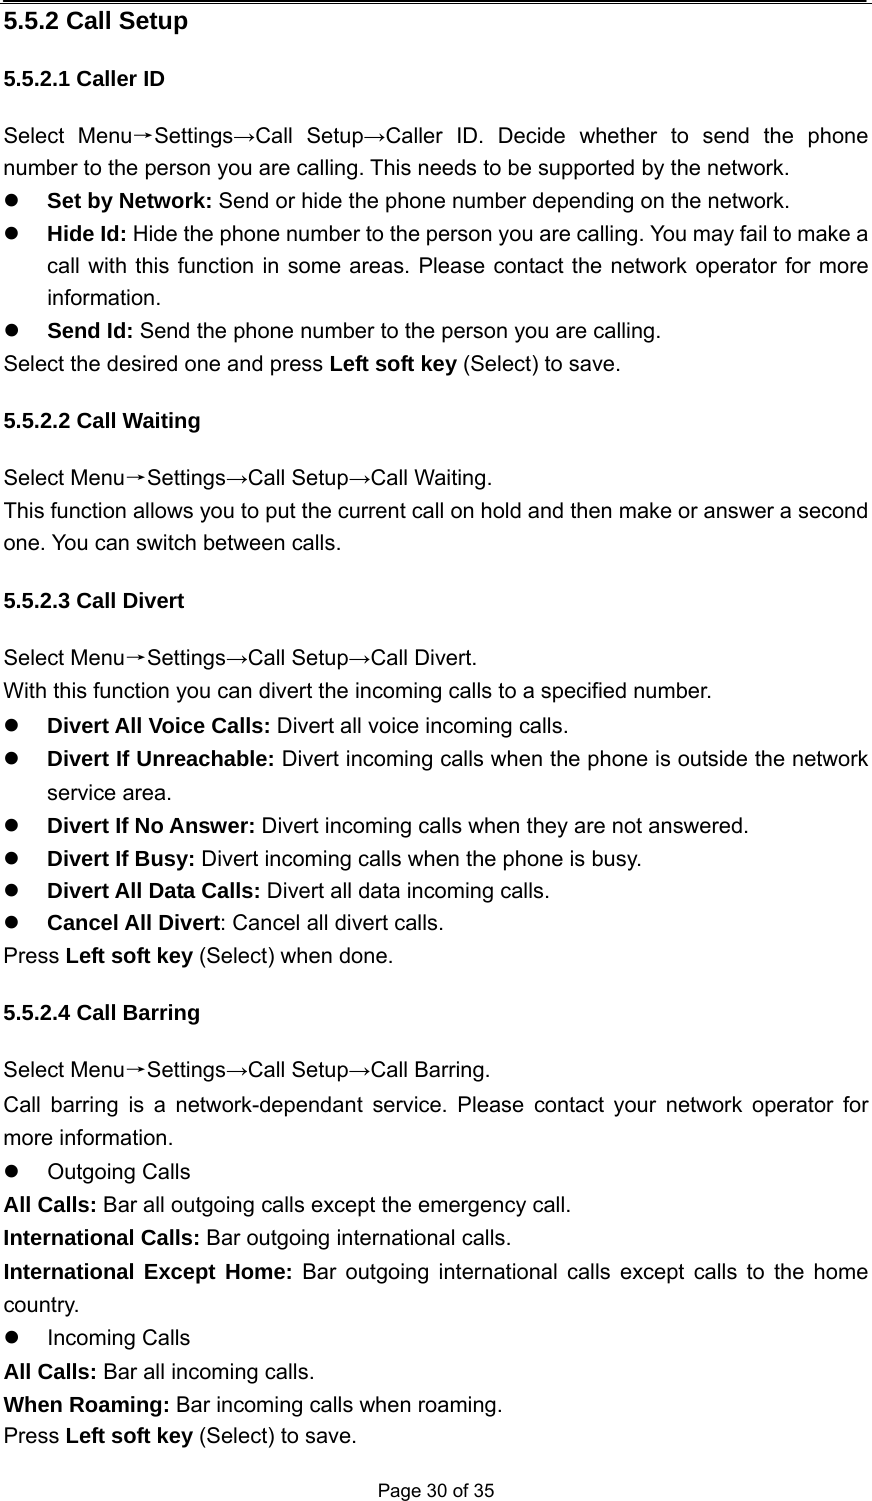  Page 30 of 35 5.5.2 Call Setup 5.5.2.1 Caller ID Select Menu→Settings→Call Setup→Caller ID. Decide whether to send the phone number to the person you are calling. This needs to be supported by the network. z Set by Network: Send or hide the phone number depending on the network. z Hide Id: Hide the phone number to the person you are calling. You may fail to make a call with this function in some areas. Please contact the network operator for more information. z Send Id: Send the phone number to the person you are calling. Select the desired one and press Left soft key (Select) to save. 5.5.2.2 Call Waiting Select Menu→Settings→Call Setup→Call Waiting. This function allows you to put the current call on hold and then make or answer a second one. You can switch between calls. 5.5.2.3 Call Divert Select Menu→Settings→Call Setup→Call Divert. With this function you can divert the incoming calls to a specified number.   z Divert All Voice Calls: Divert all voice incoming calls. z Divert If Unreachable: Divert incoming calls when the phone is outside the network service area. z Divert If No Answer: Divert incoming calls when they are not answered. z Divert If Busy: Divert incoming calls when the phone is busy. z Divert All Data Calls: Divert all data incoming calls. z Cancel All Divert: Cancel all divert calls. Press Left soft key (Select) when done. 5.5.2.4 Call Barring Select Menu→Settings→Call Setup→Call Barring. Call barring is a network-dependant service. Please contact your network operator for more information. z Outgoing Calls All Calls: Bar all outgoing calls except the emergency call. International Calls: Bar outgoing international calls. International Except Home: Bar outgoing international calls except calls to the home country. z Incoming Calls All Calls: Bar all incoming calls. When Roaming: Bar incoming calls when roaming. Press Left soft key (Select) to save. 